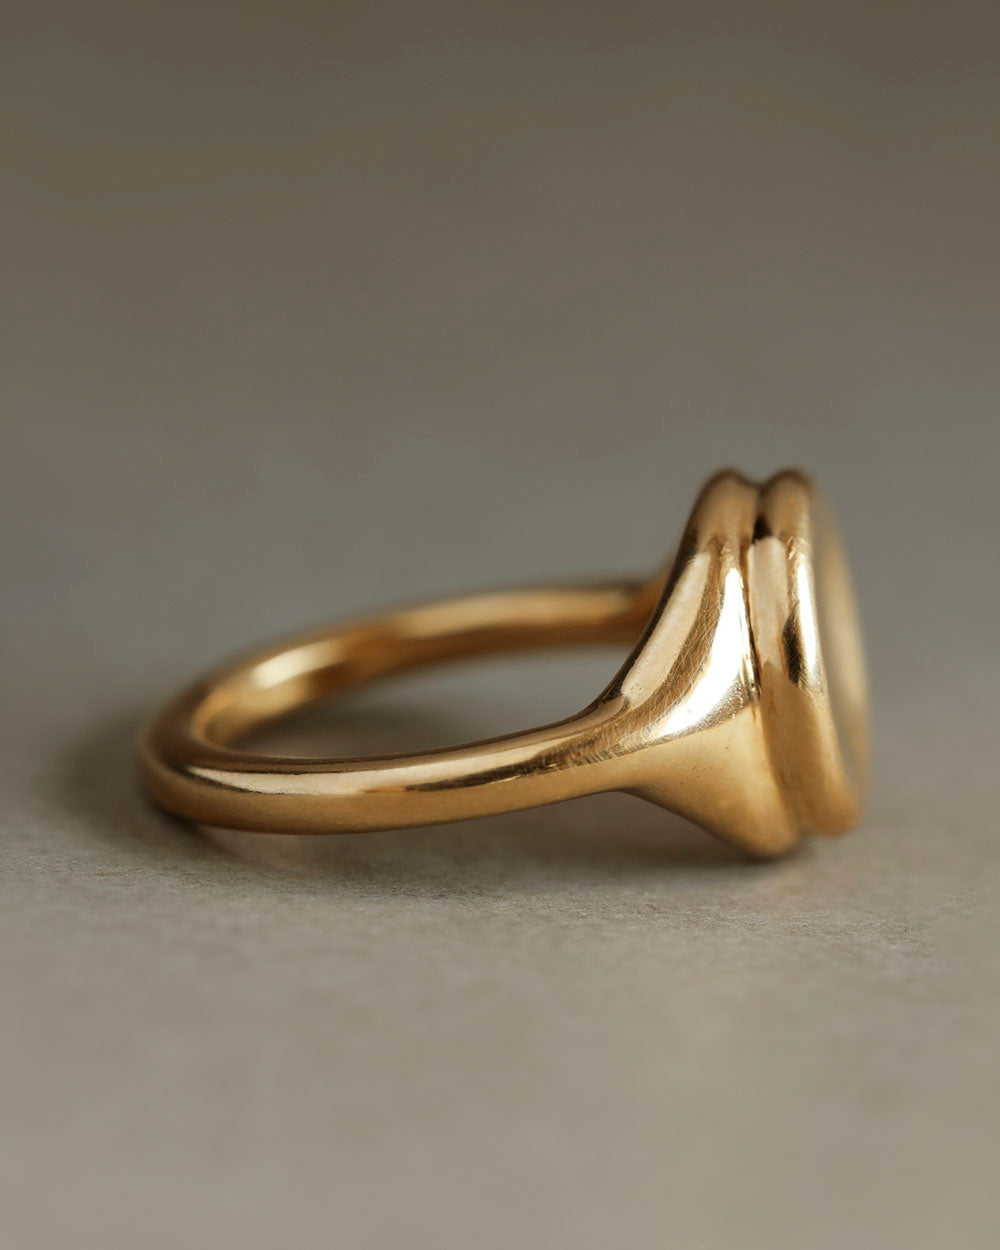 Profile view of a large 18k yellow solid gold signet style ring with a large soft concave button circle atop the signet.